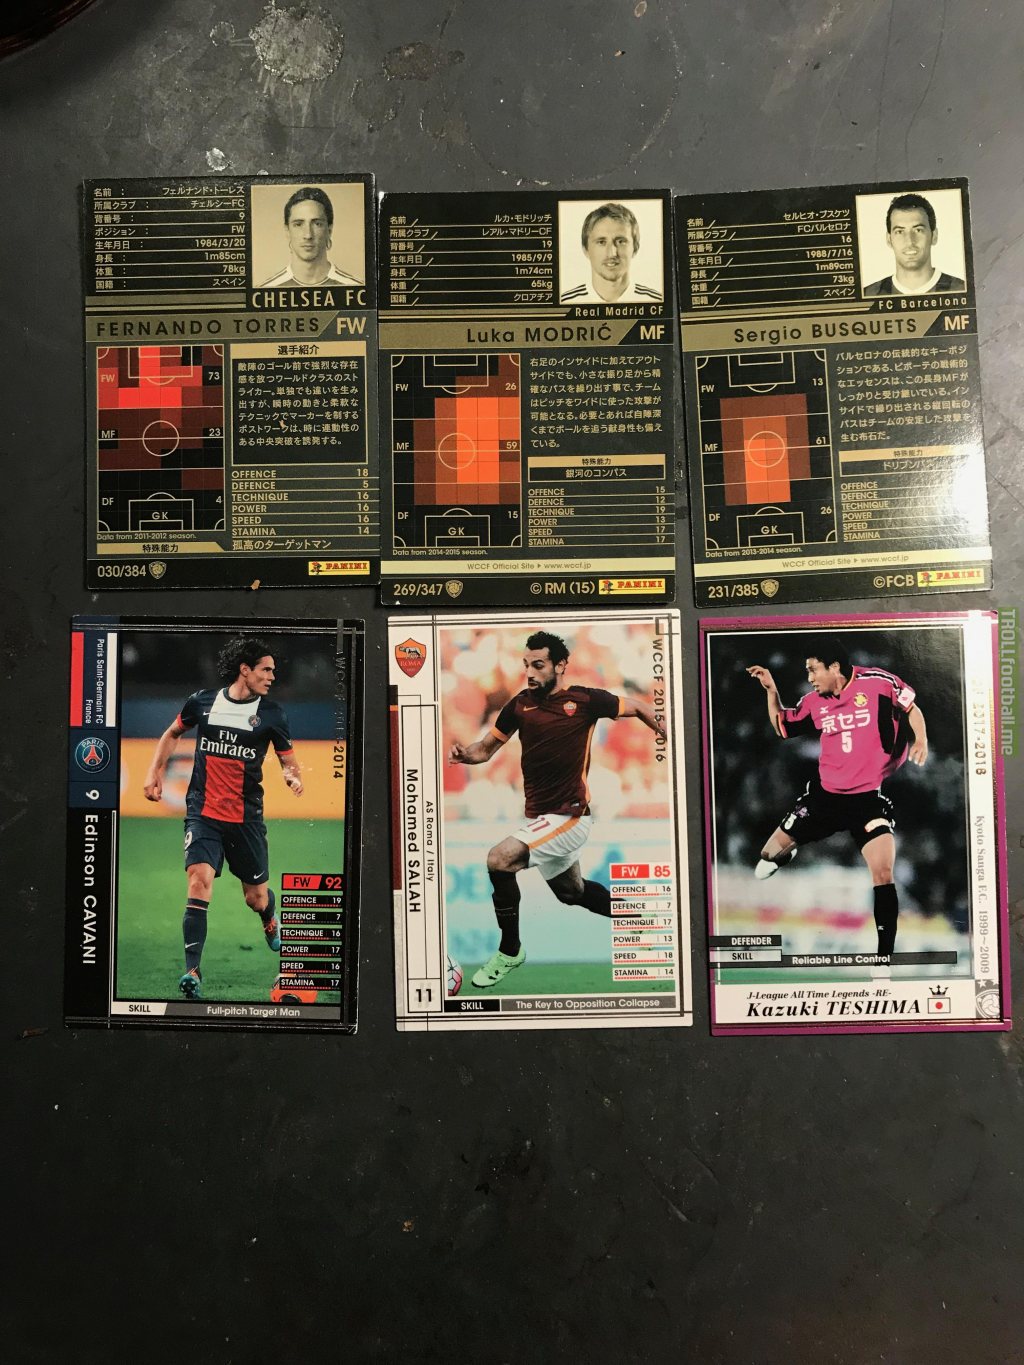 Was going thru my stuff and forgot I found a couple hundred Japanese football trading cards in the trash in Osaka. I know they aren't worth anything, but it was really fun going thru them.